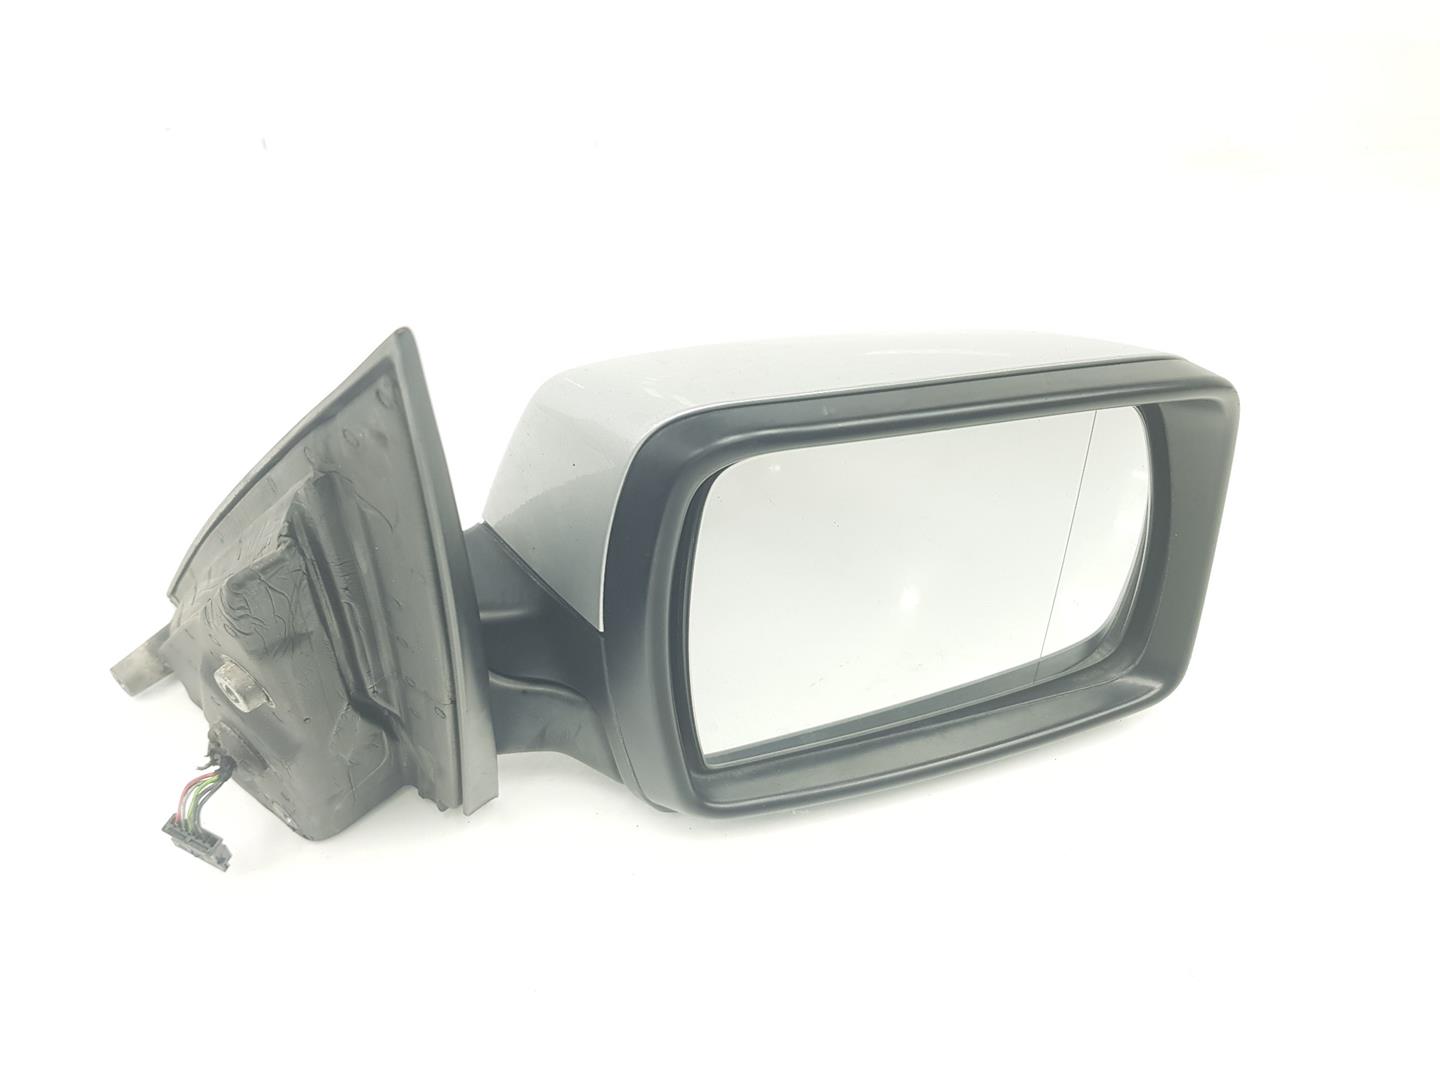 BMW X3 E83 (2003-2010) Right Side Wing Mirror 67137232744, 67137232744 24244729